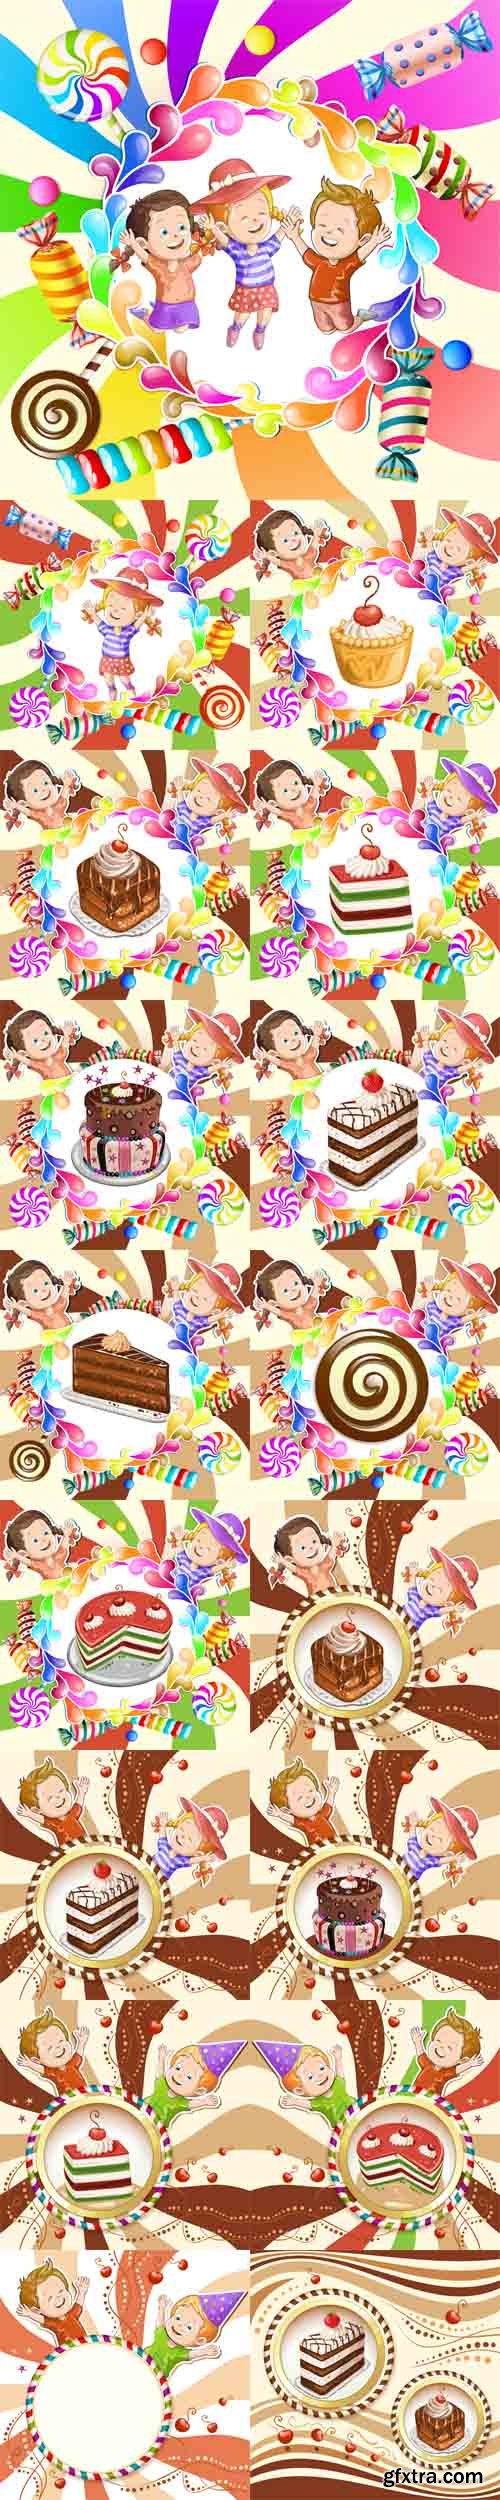 Vector Set - Illustration of Kids with Cake and Candies